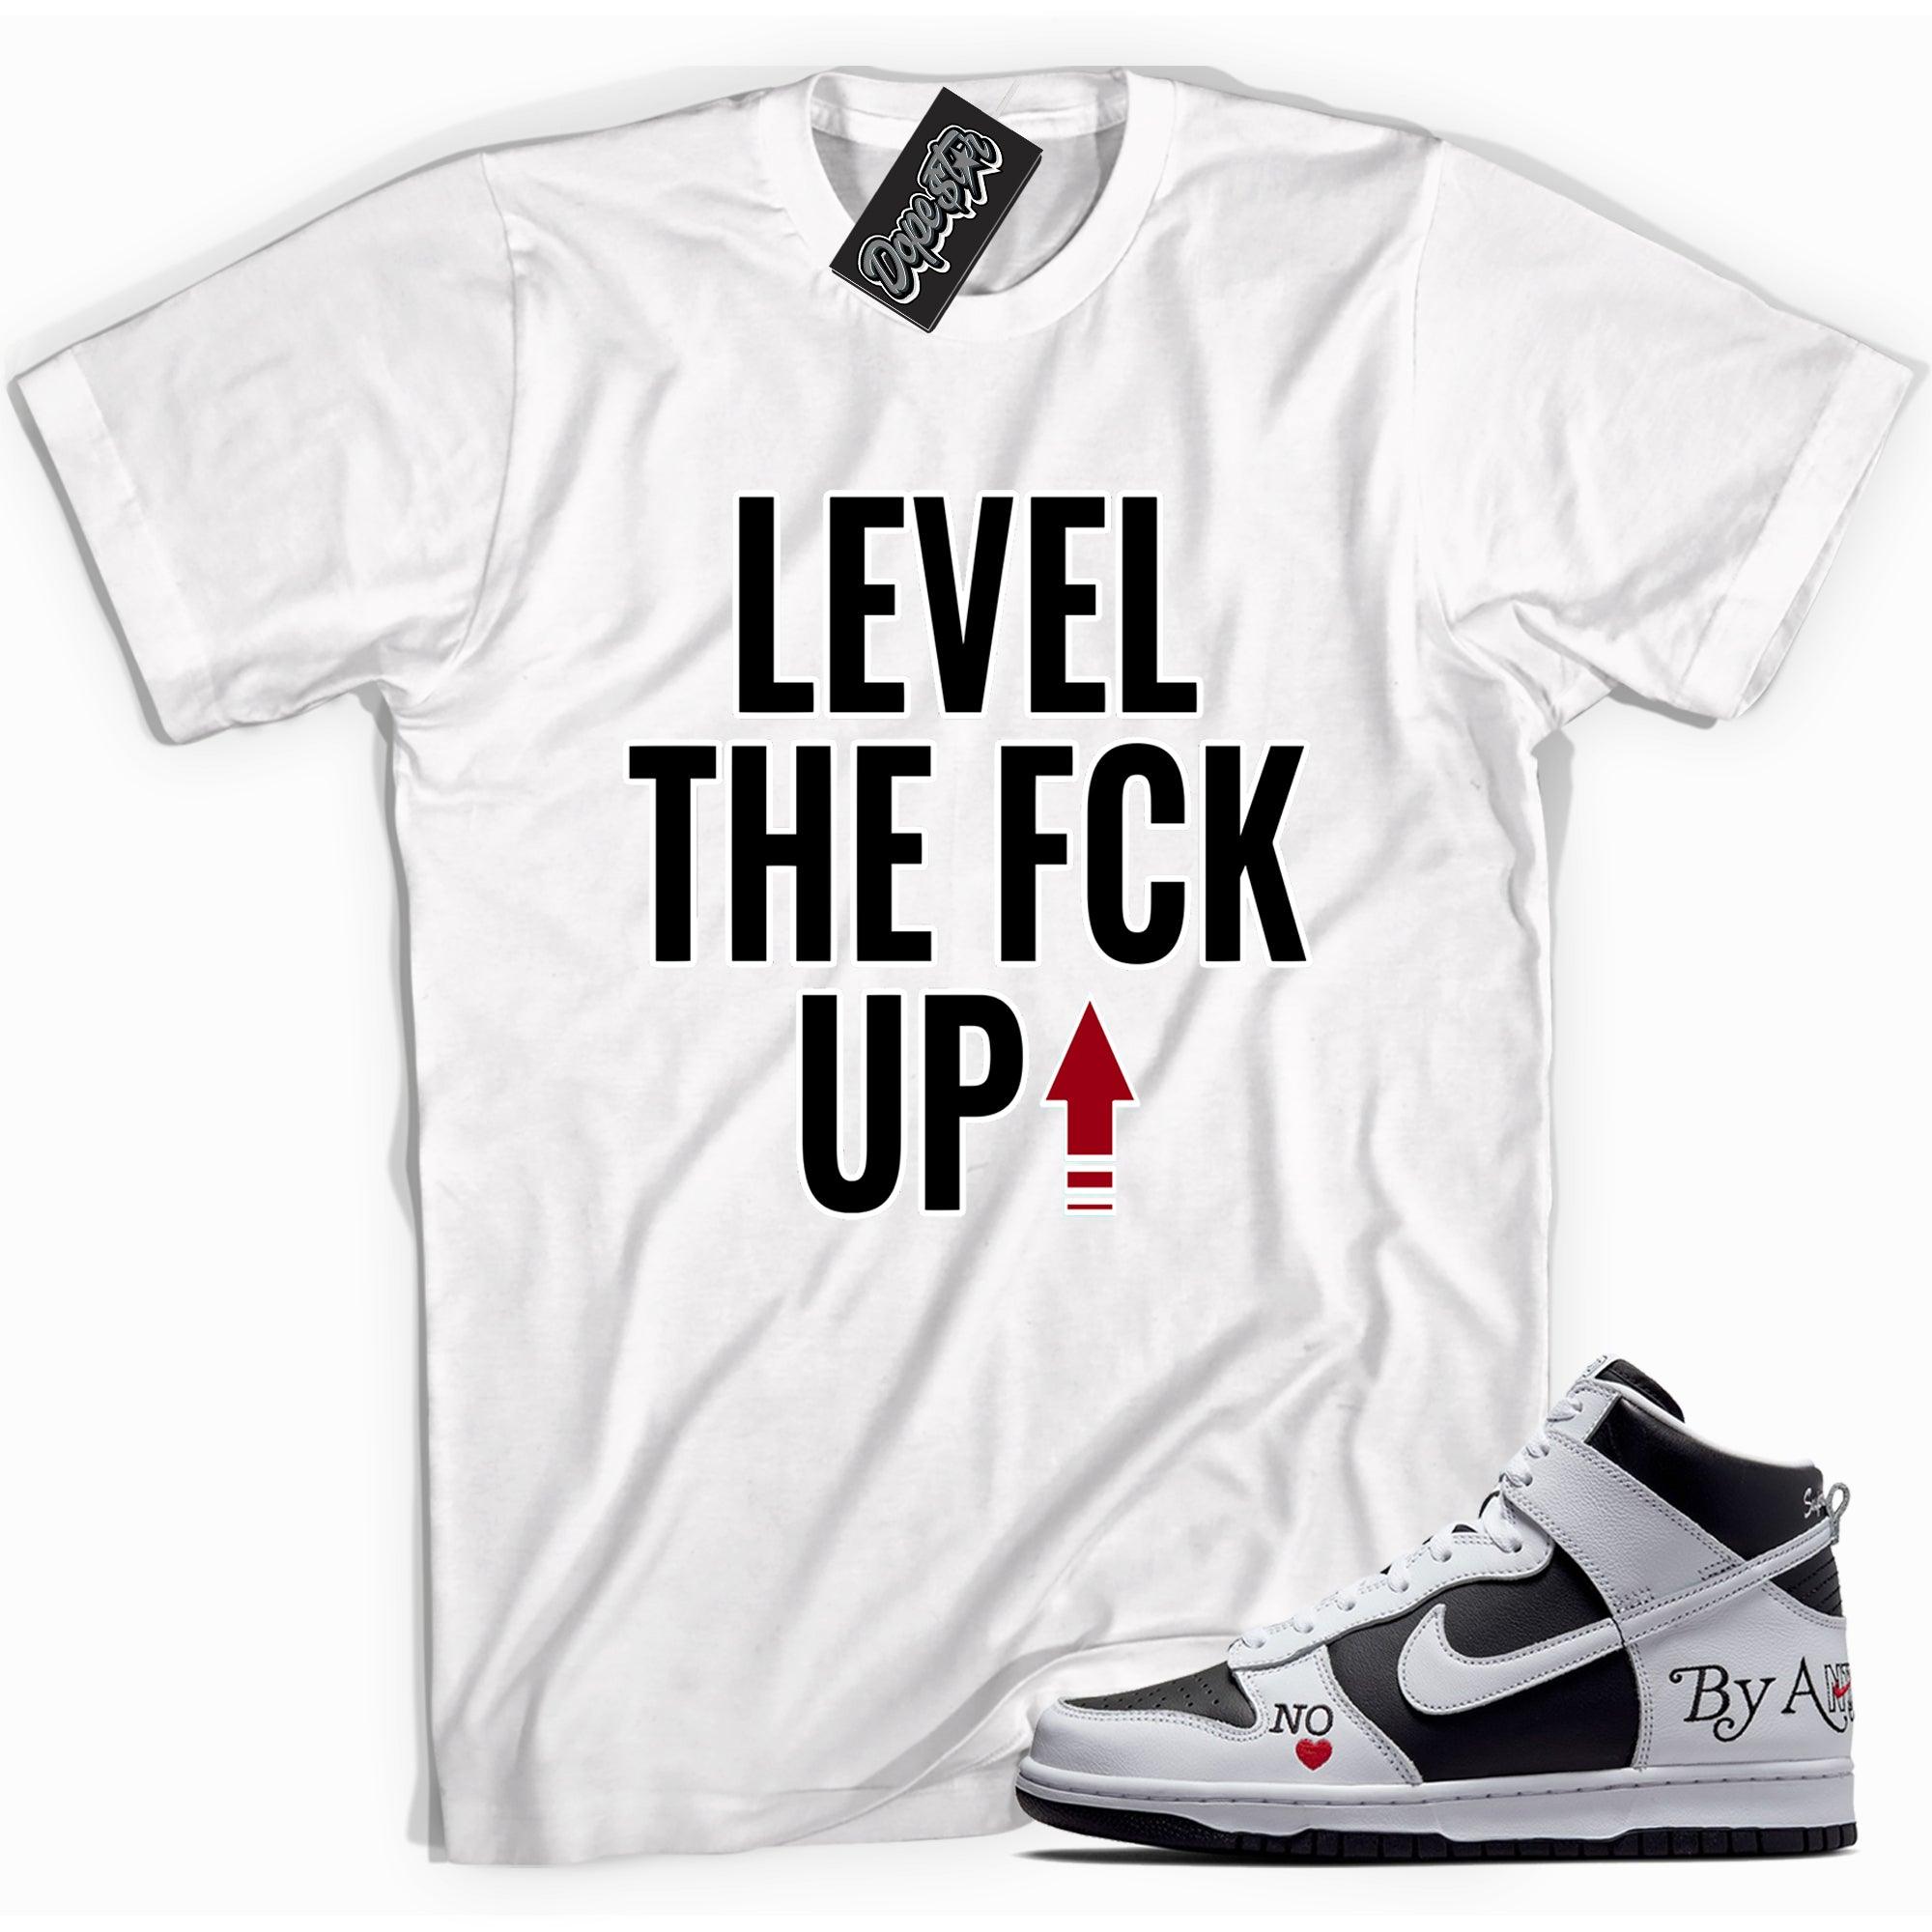 Cool white graphic tee with 'Level Up' print, that perfectly matches Nike SB Dunk High Supreme Toe sneakers.